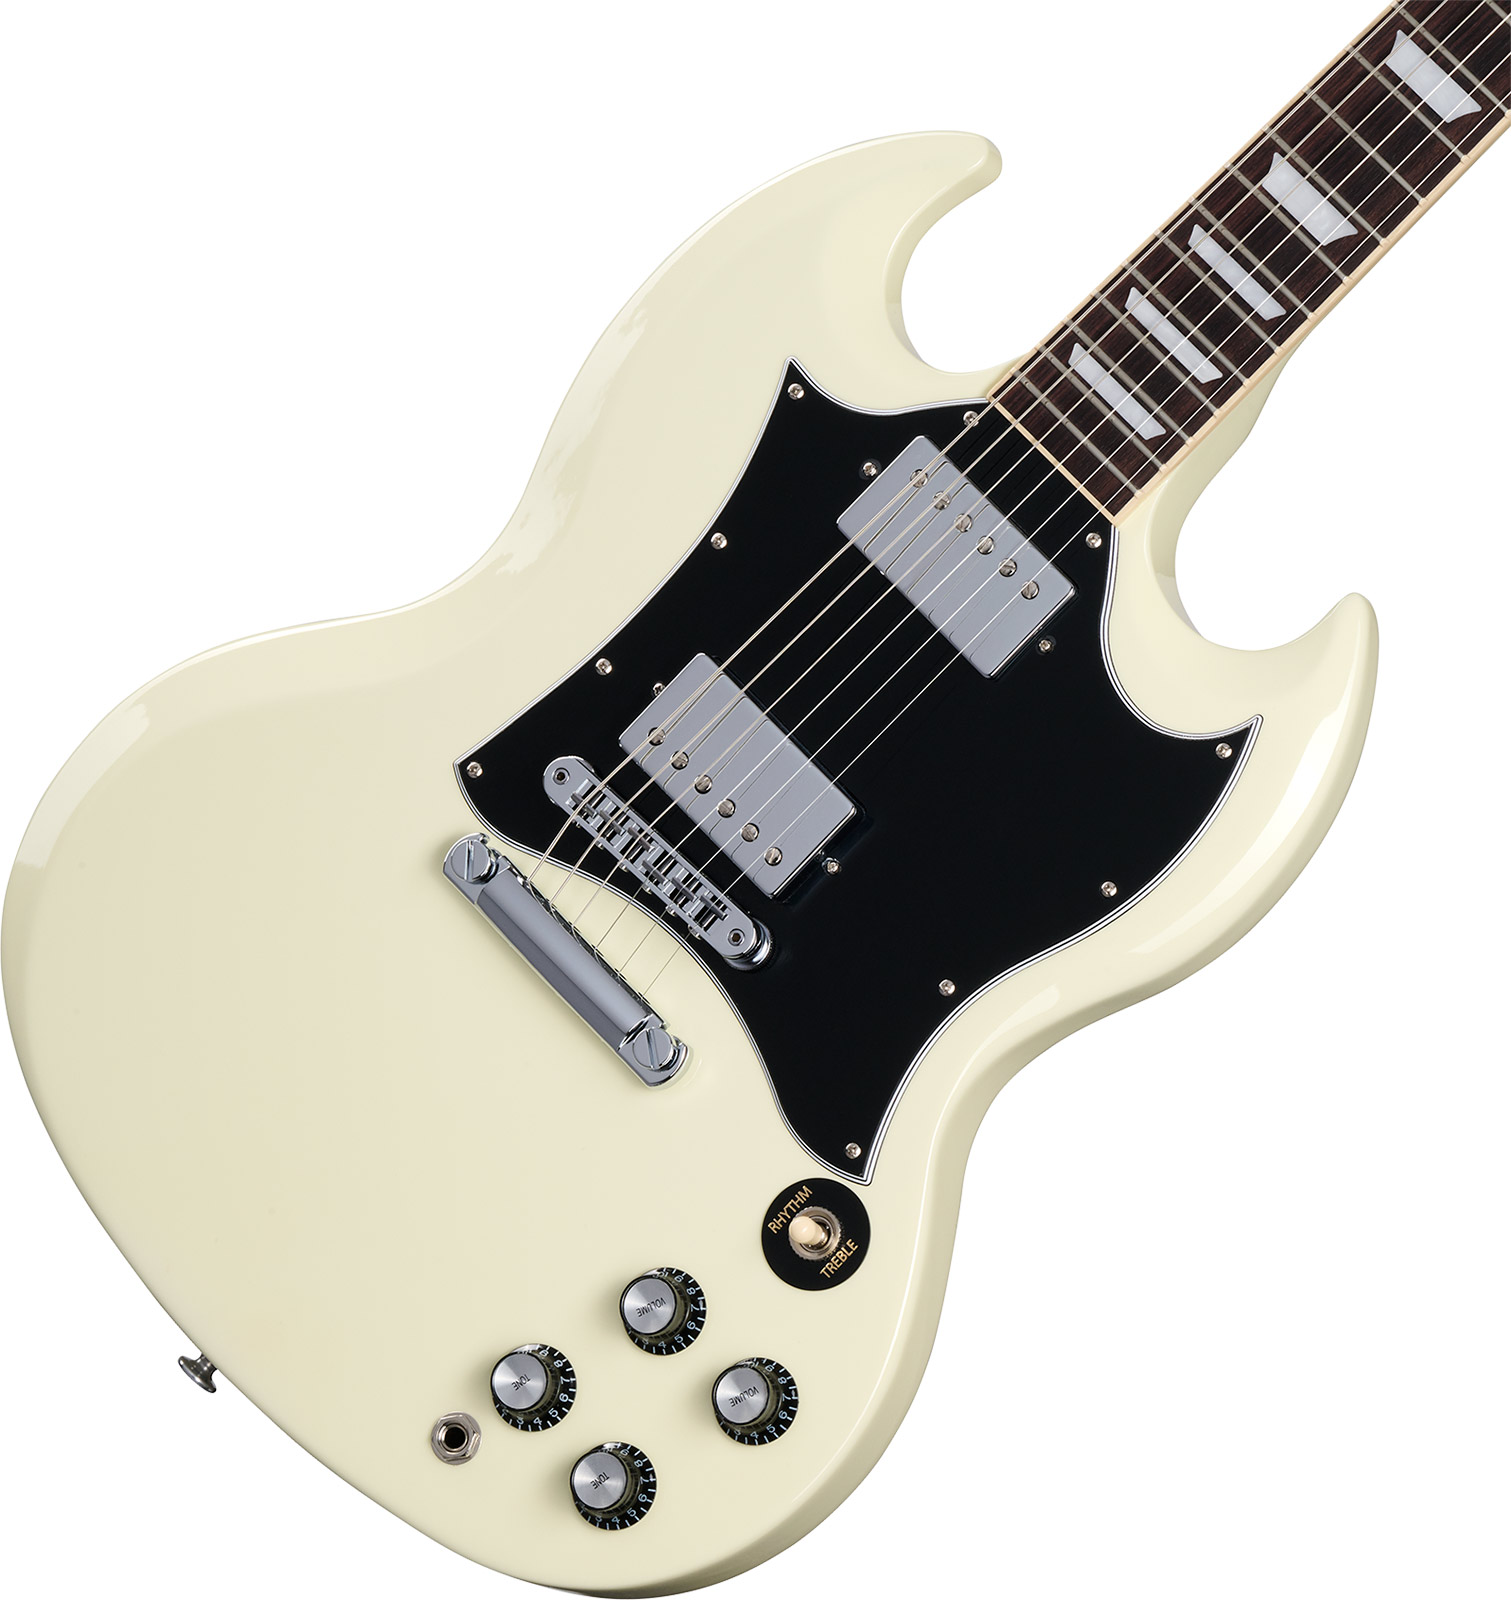 Gibson Sg Standard Custom Color 2h Ht Rw - Classic White - Double cut electric guitar - Variation 3